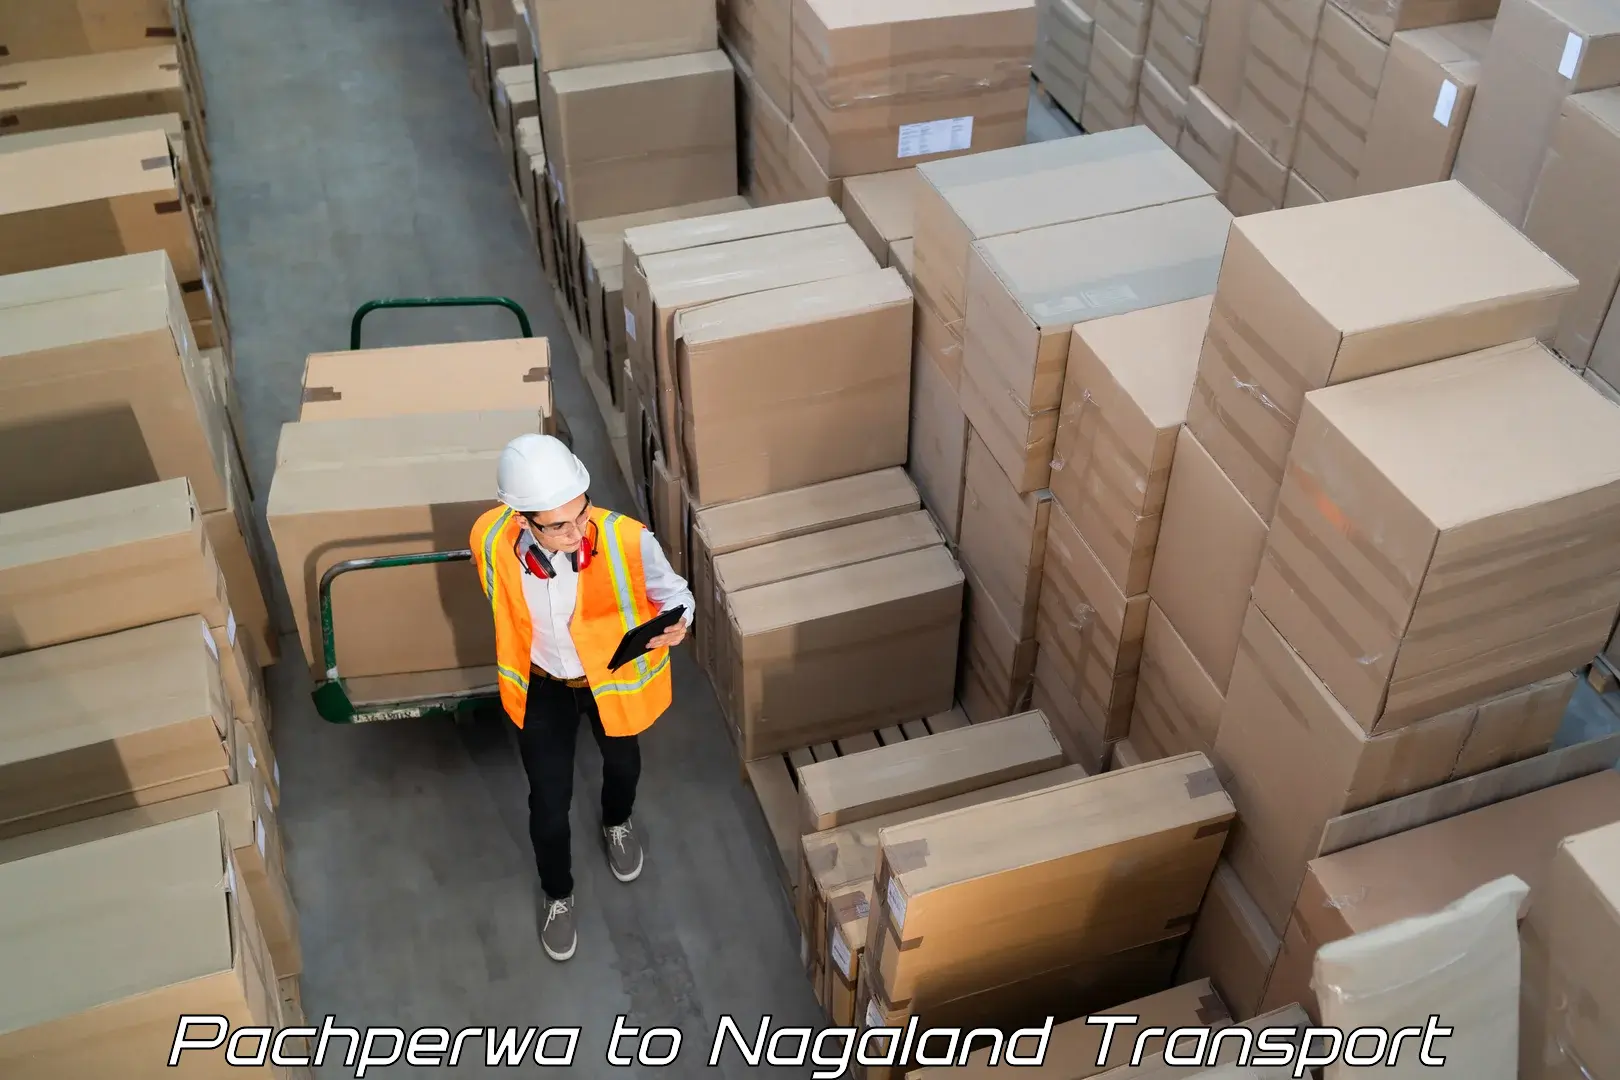 Express transport services Pachperwa to Peren